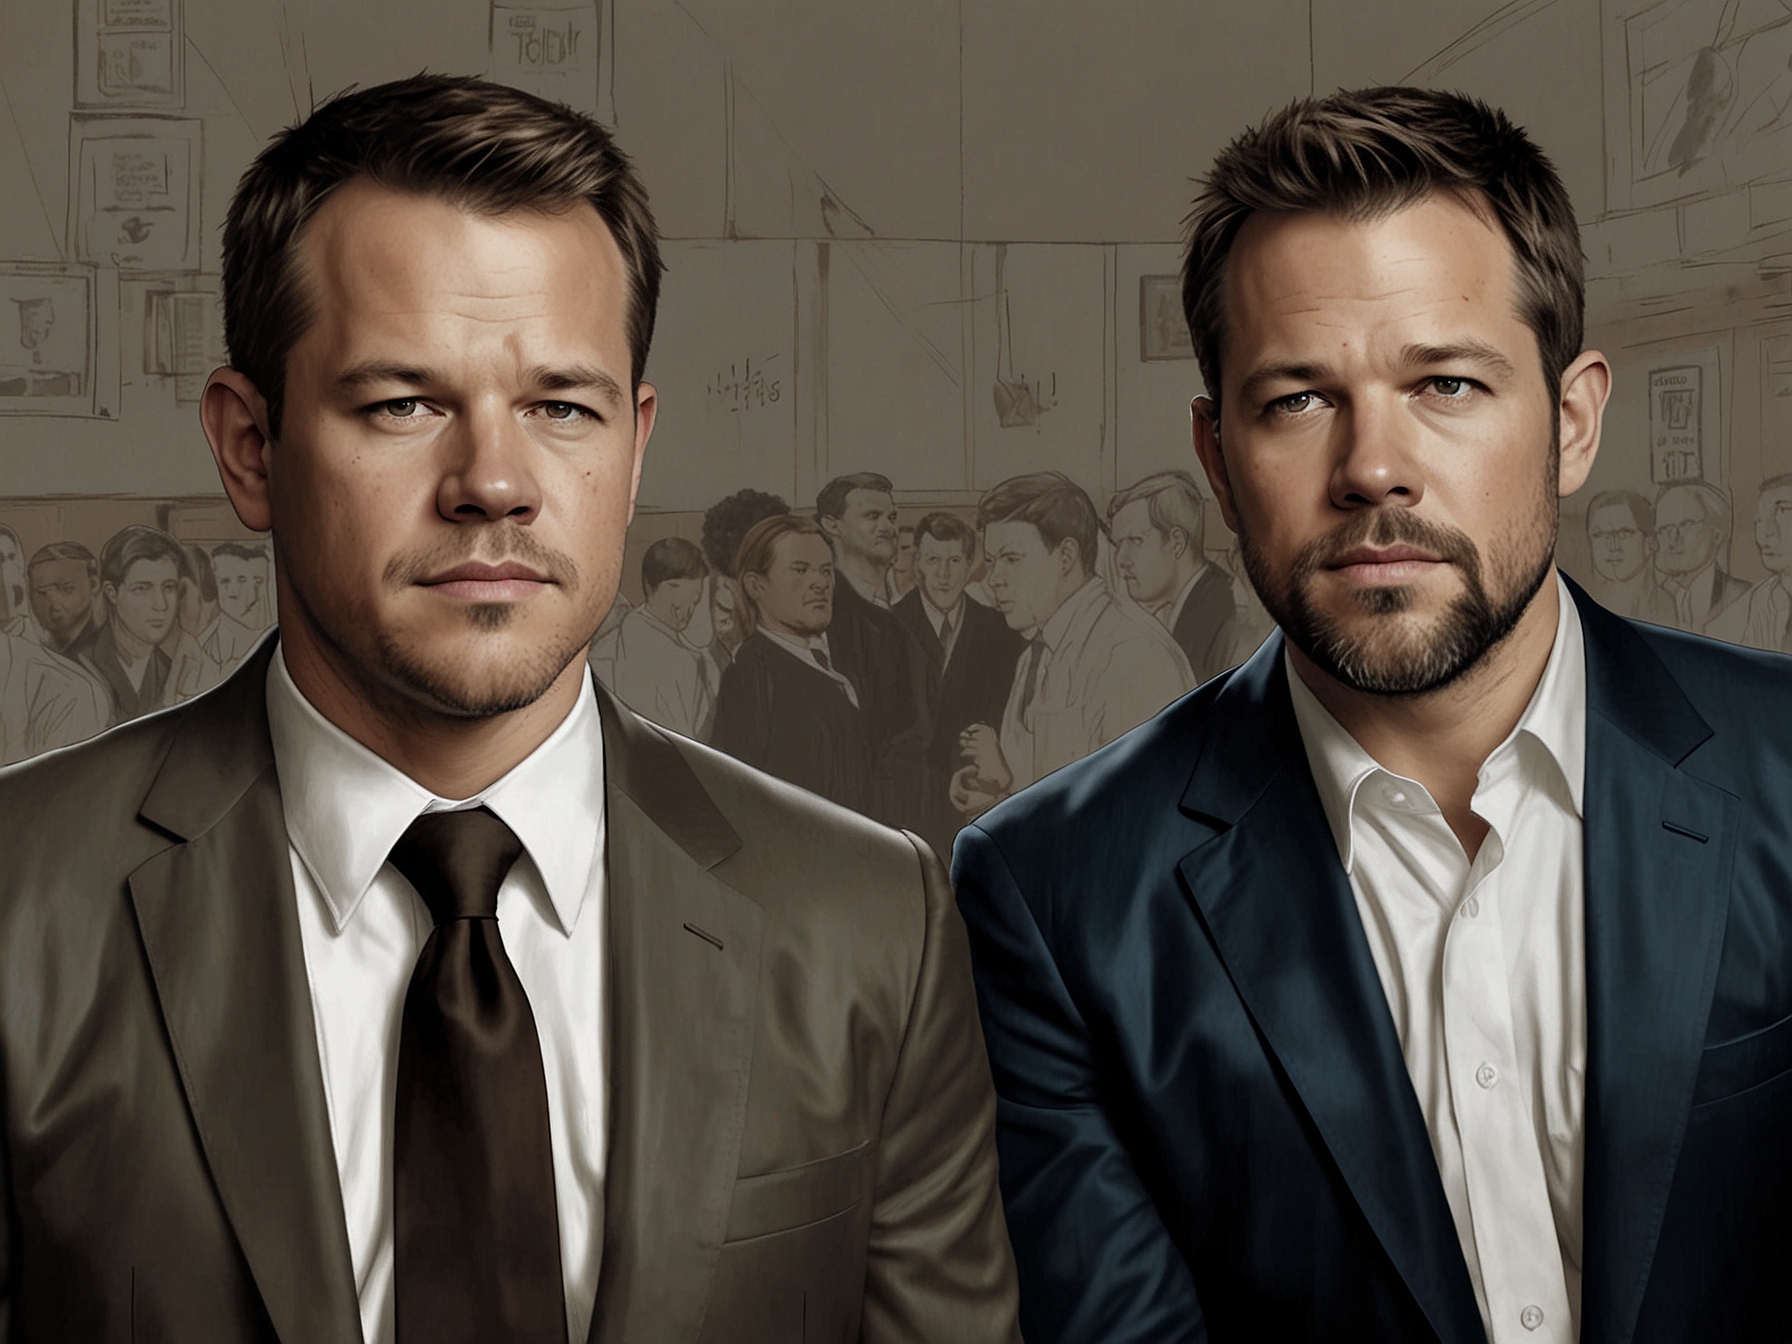 An image of Matt Damon and Ben Affleck together at an industry event, showcasing their decades-long friendship and professional collaboration.